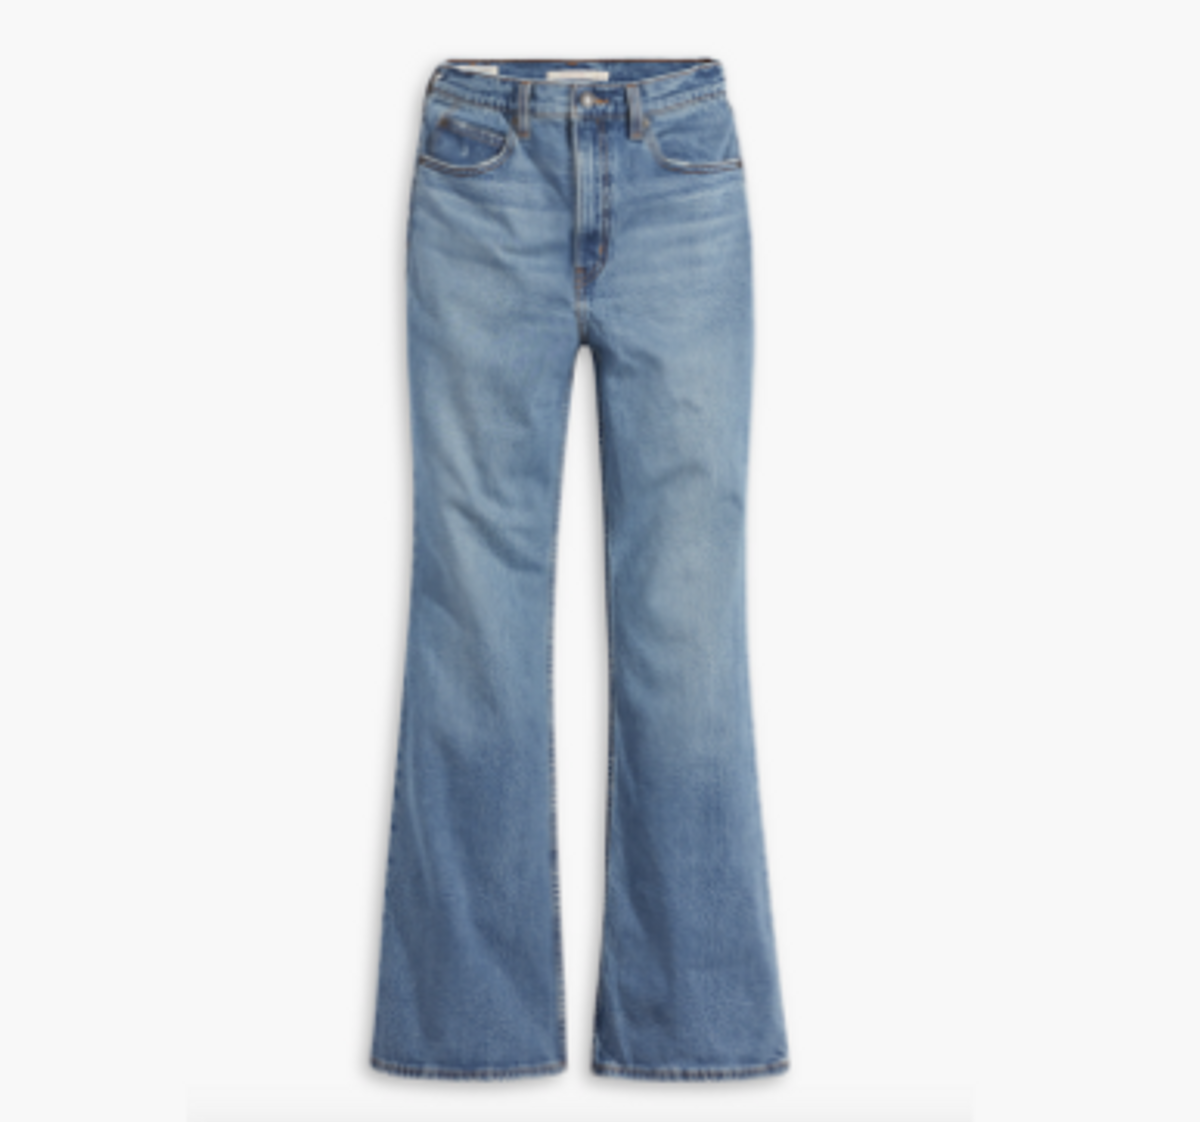 70's High Rise Women's Flare Jeans